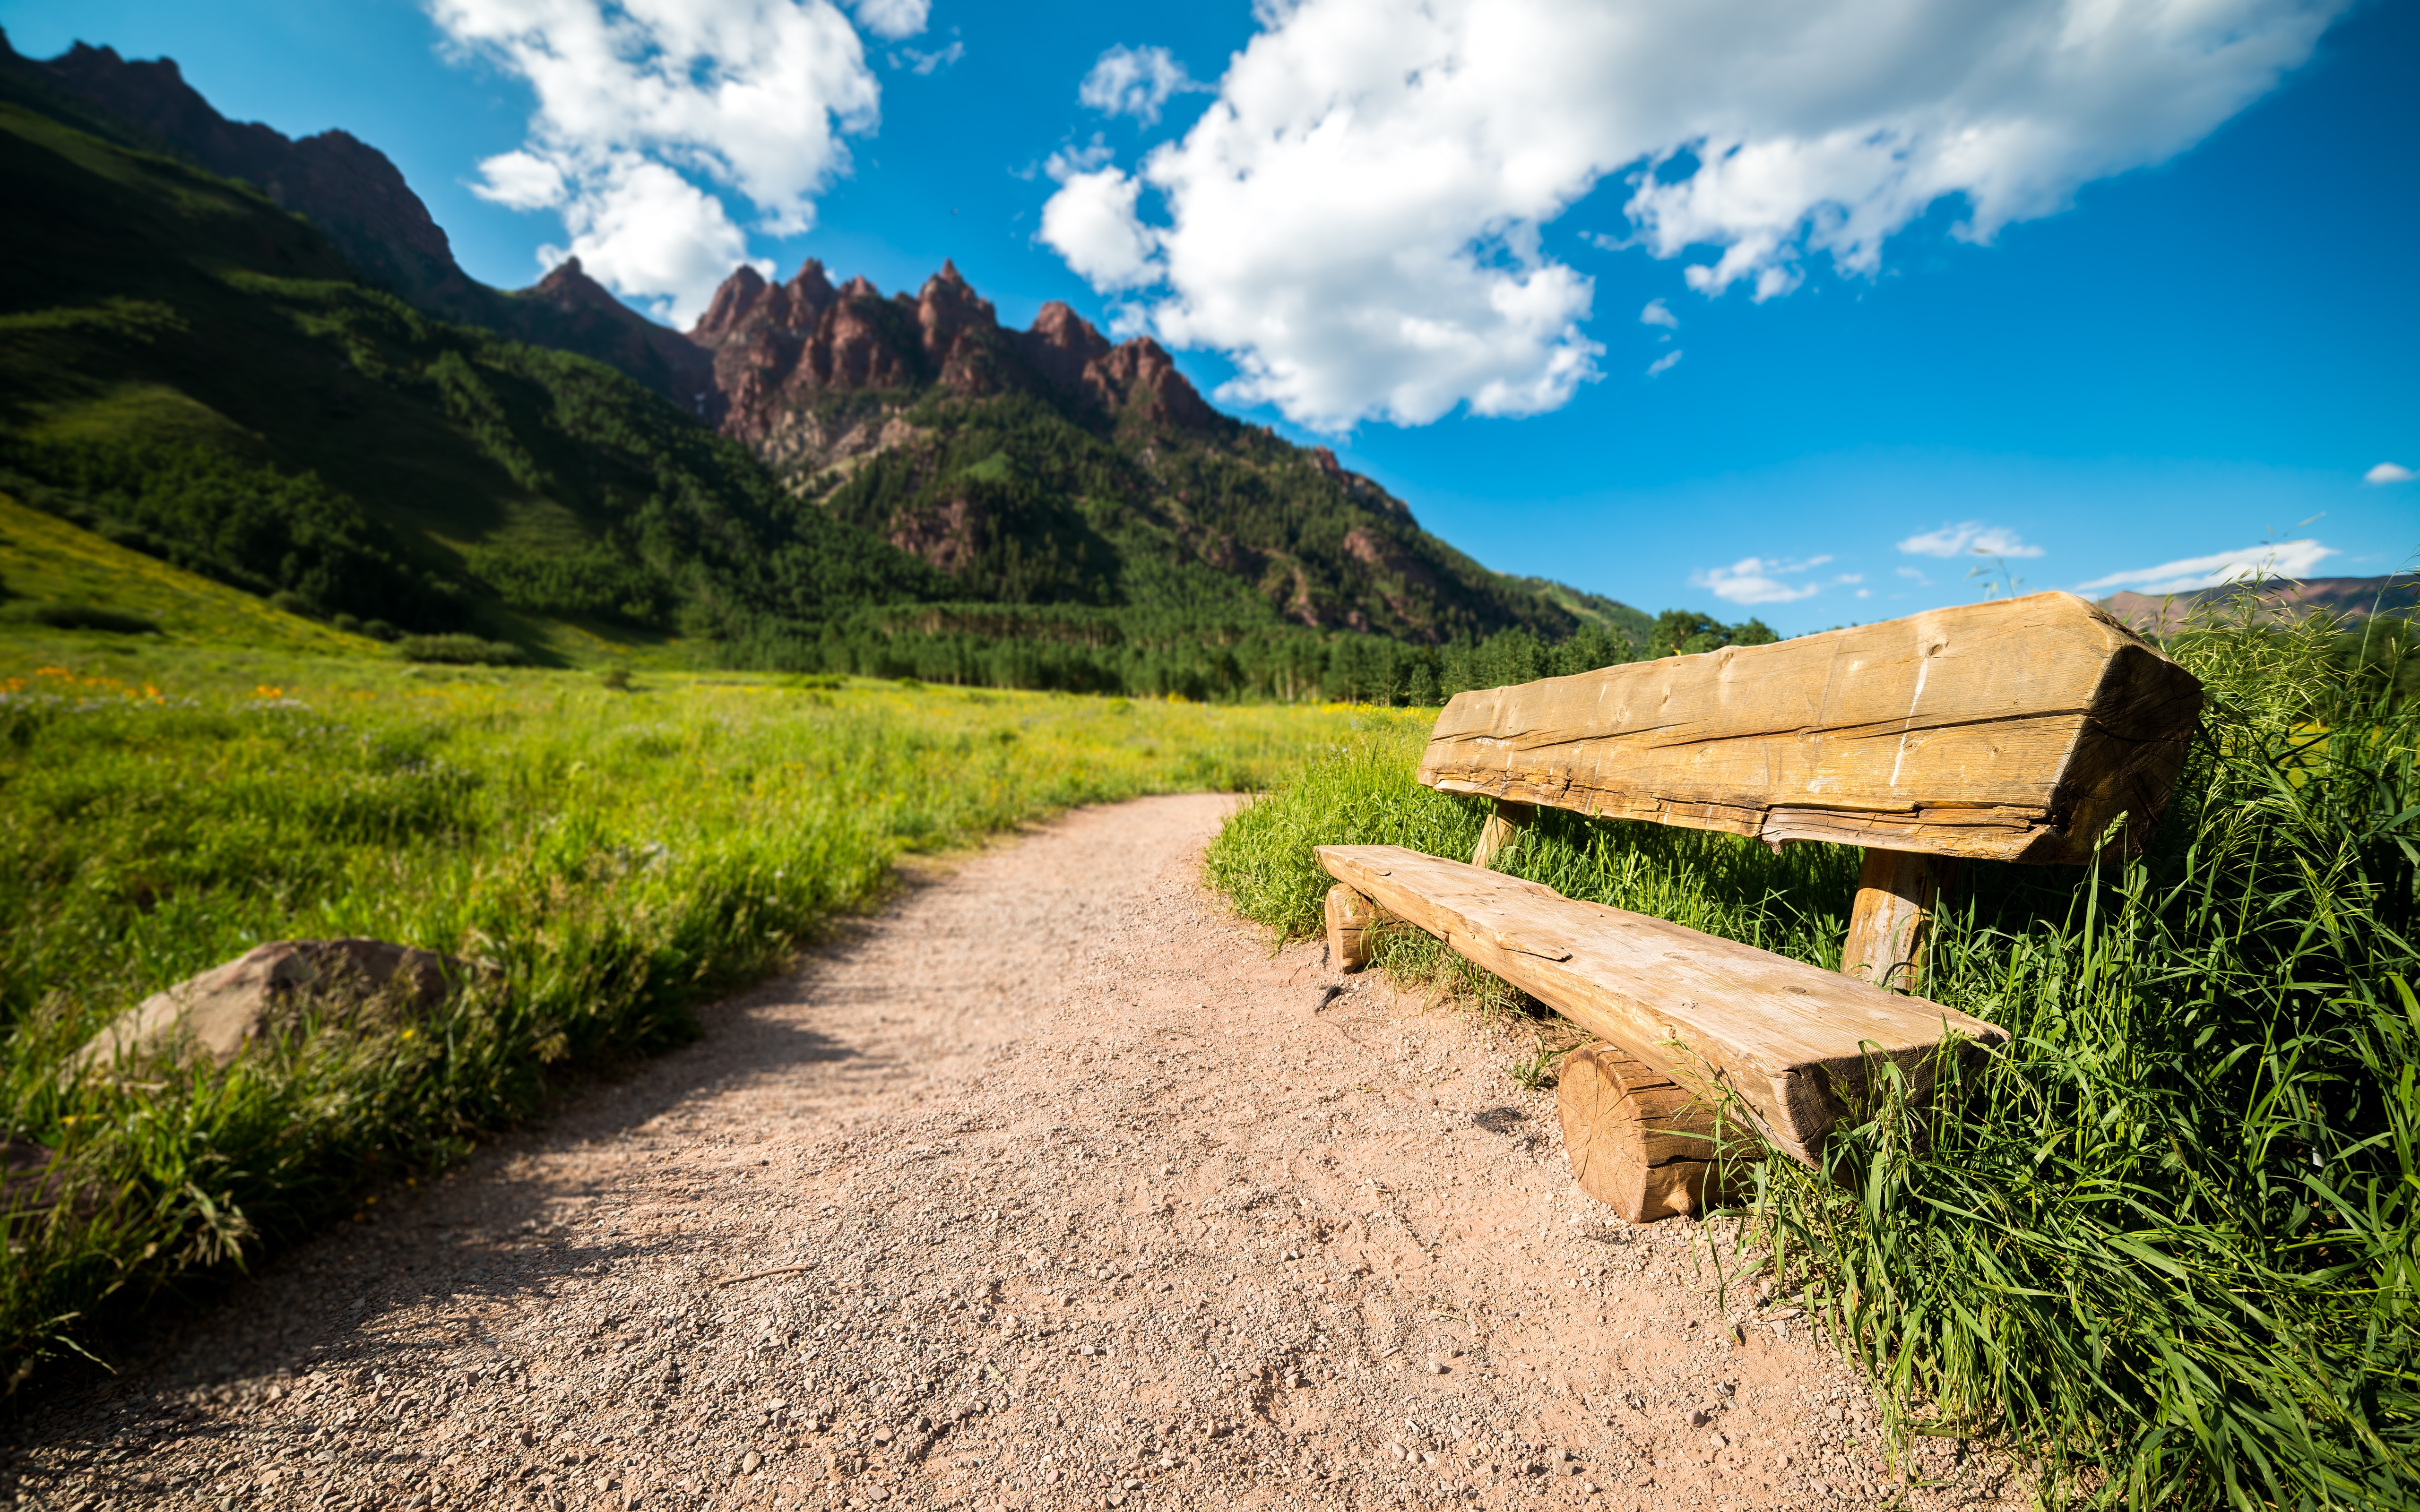 HD wallpaper, Clouds, Maroon Bells, Mountains, Pathway, 5K, Usa, Scenery, Blue Sky, Colorado, Green Grass, Park Bench